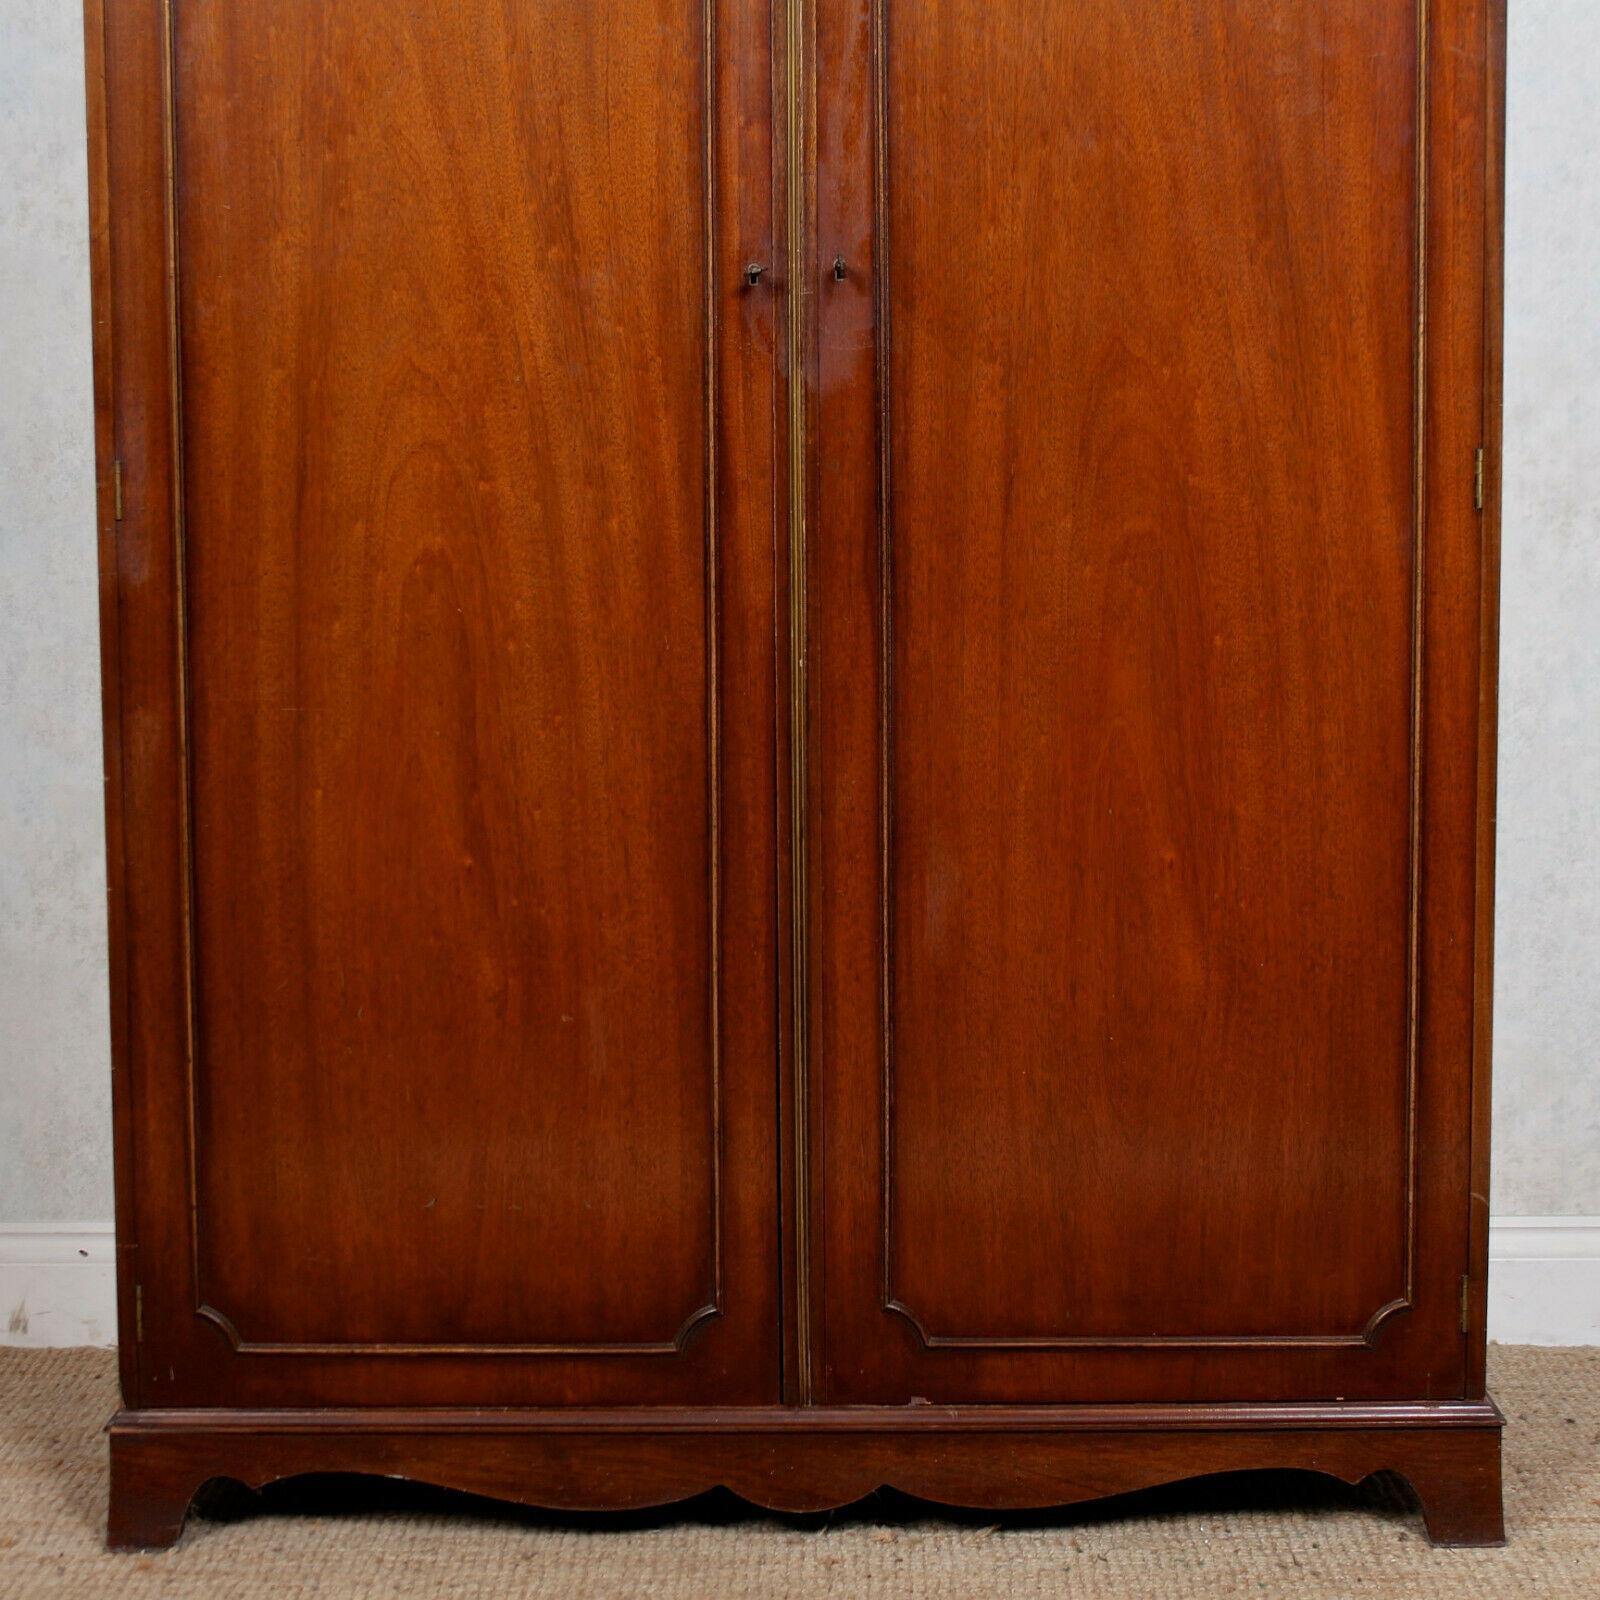 English Mahogany Wardrobe Bevan Funnell Antique Vintage Double Armoire In Good Condition For Sale In Newcastle upon Tyne, GB